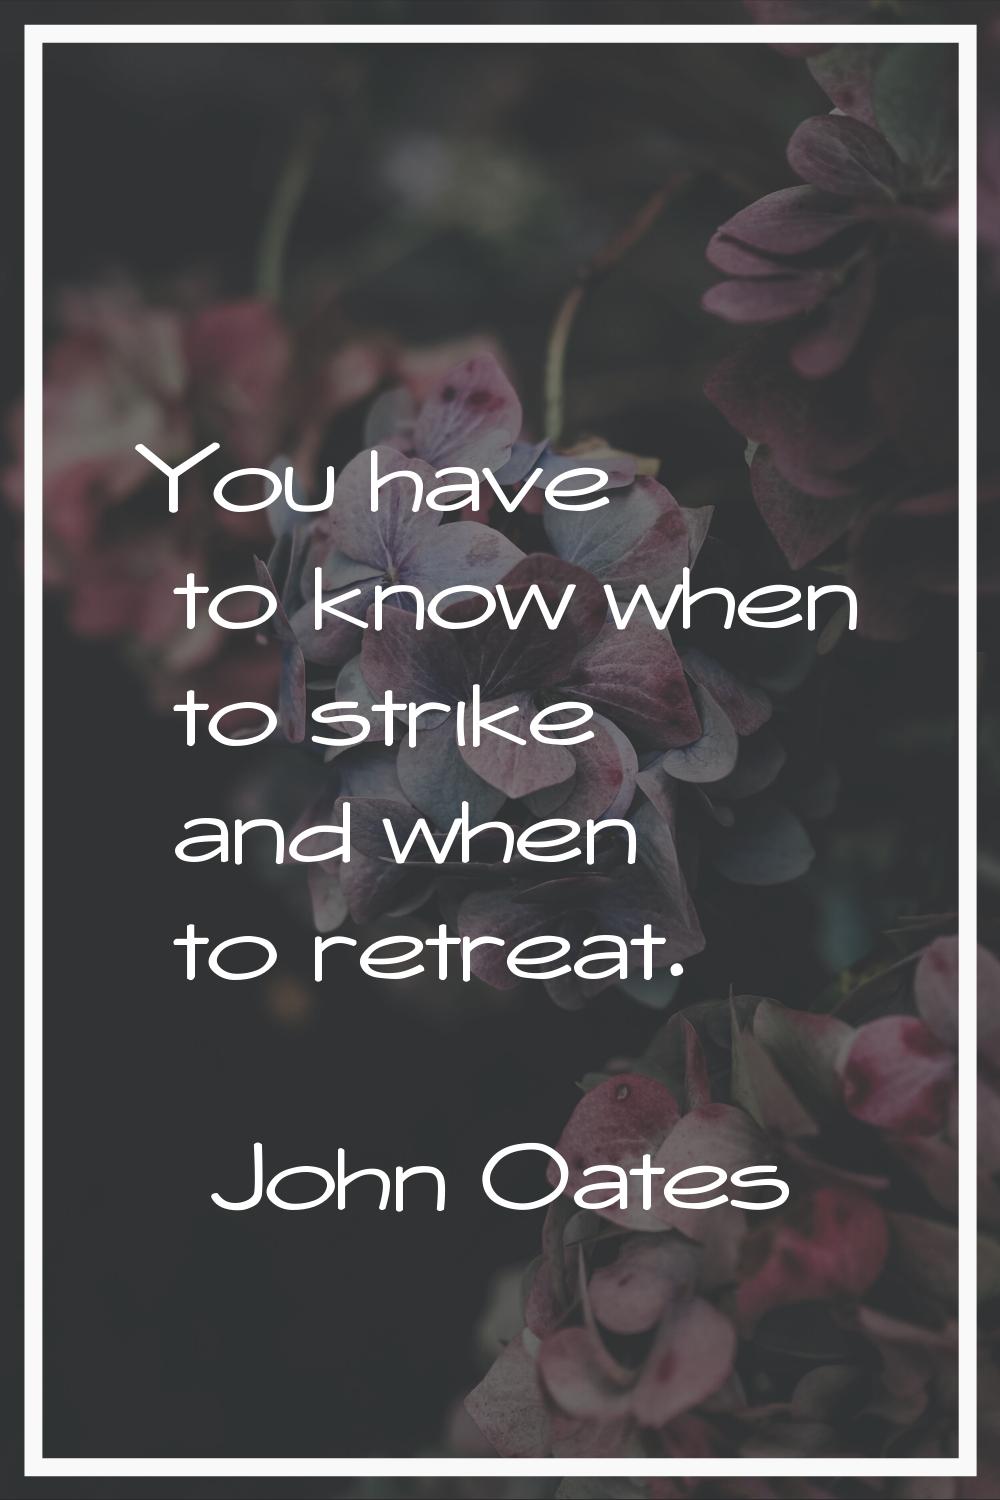 You have to know when to strike and when to retreat.